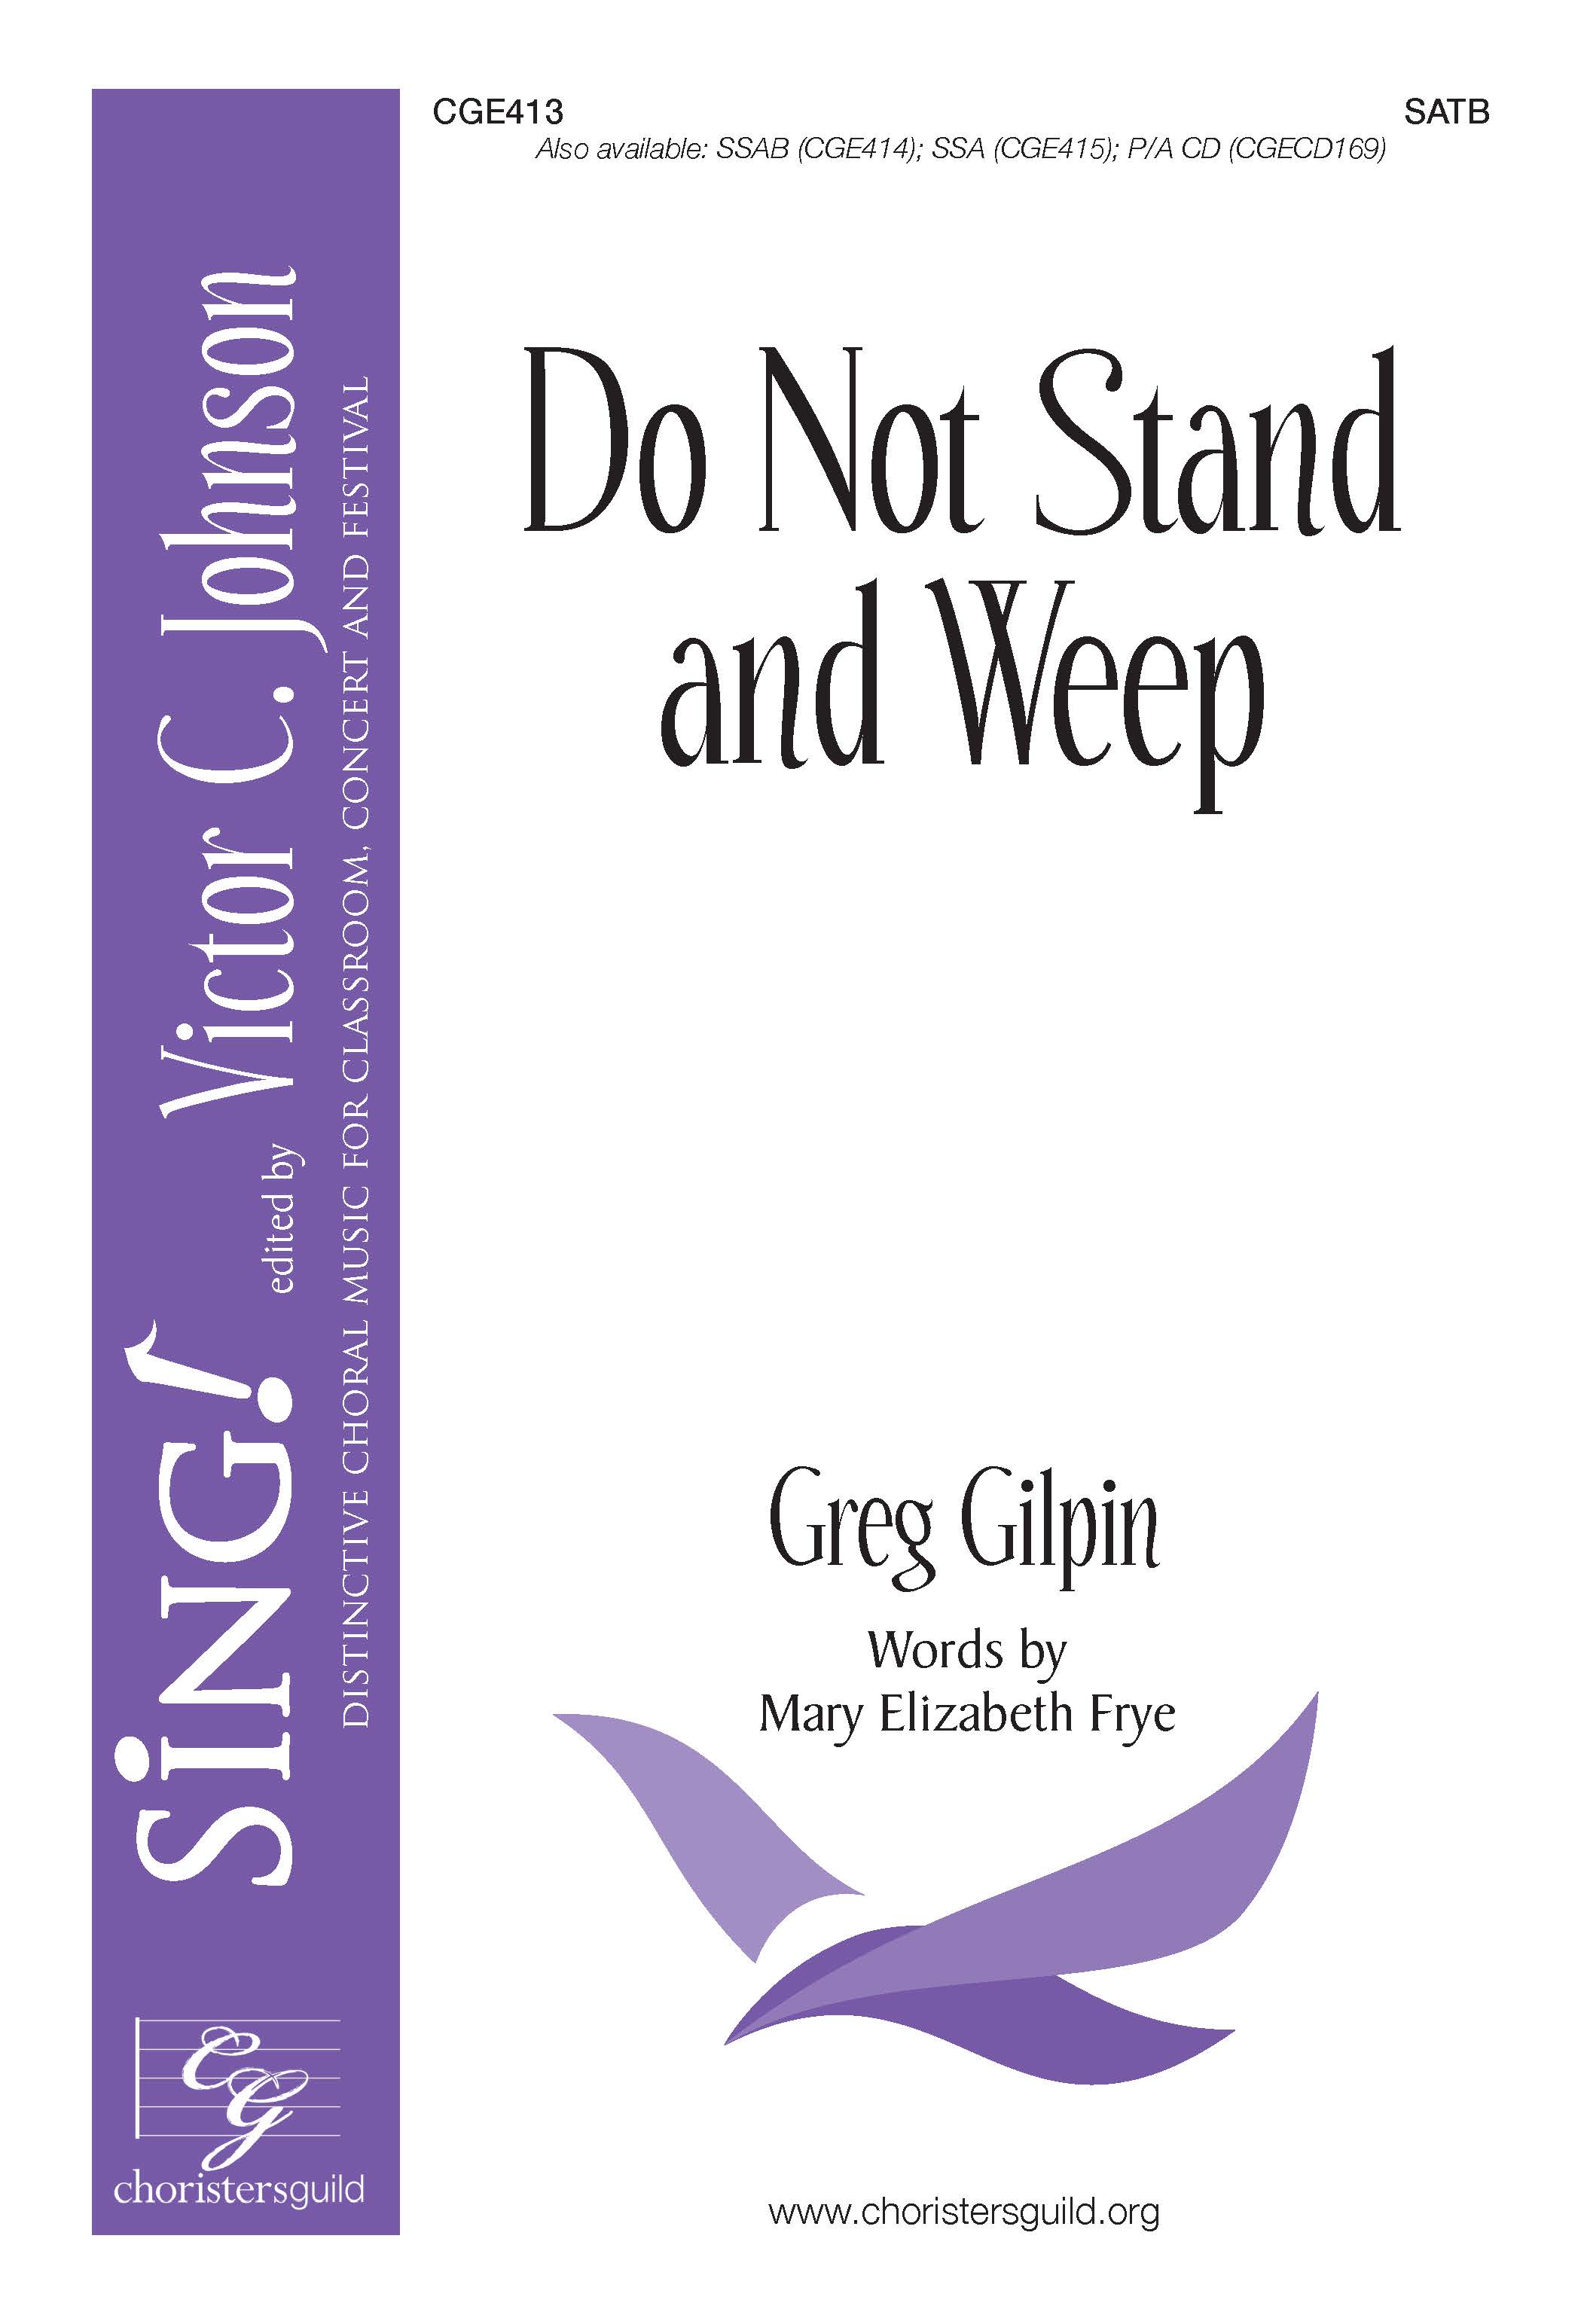 Do Not Stand and Weep - SATB